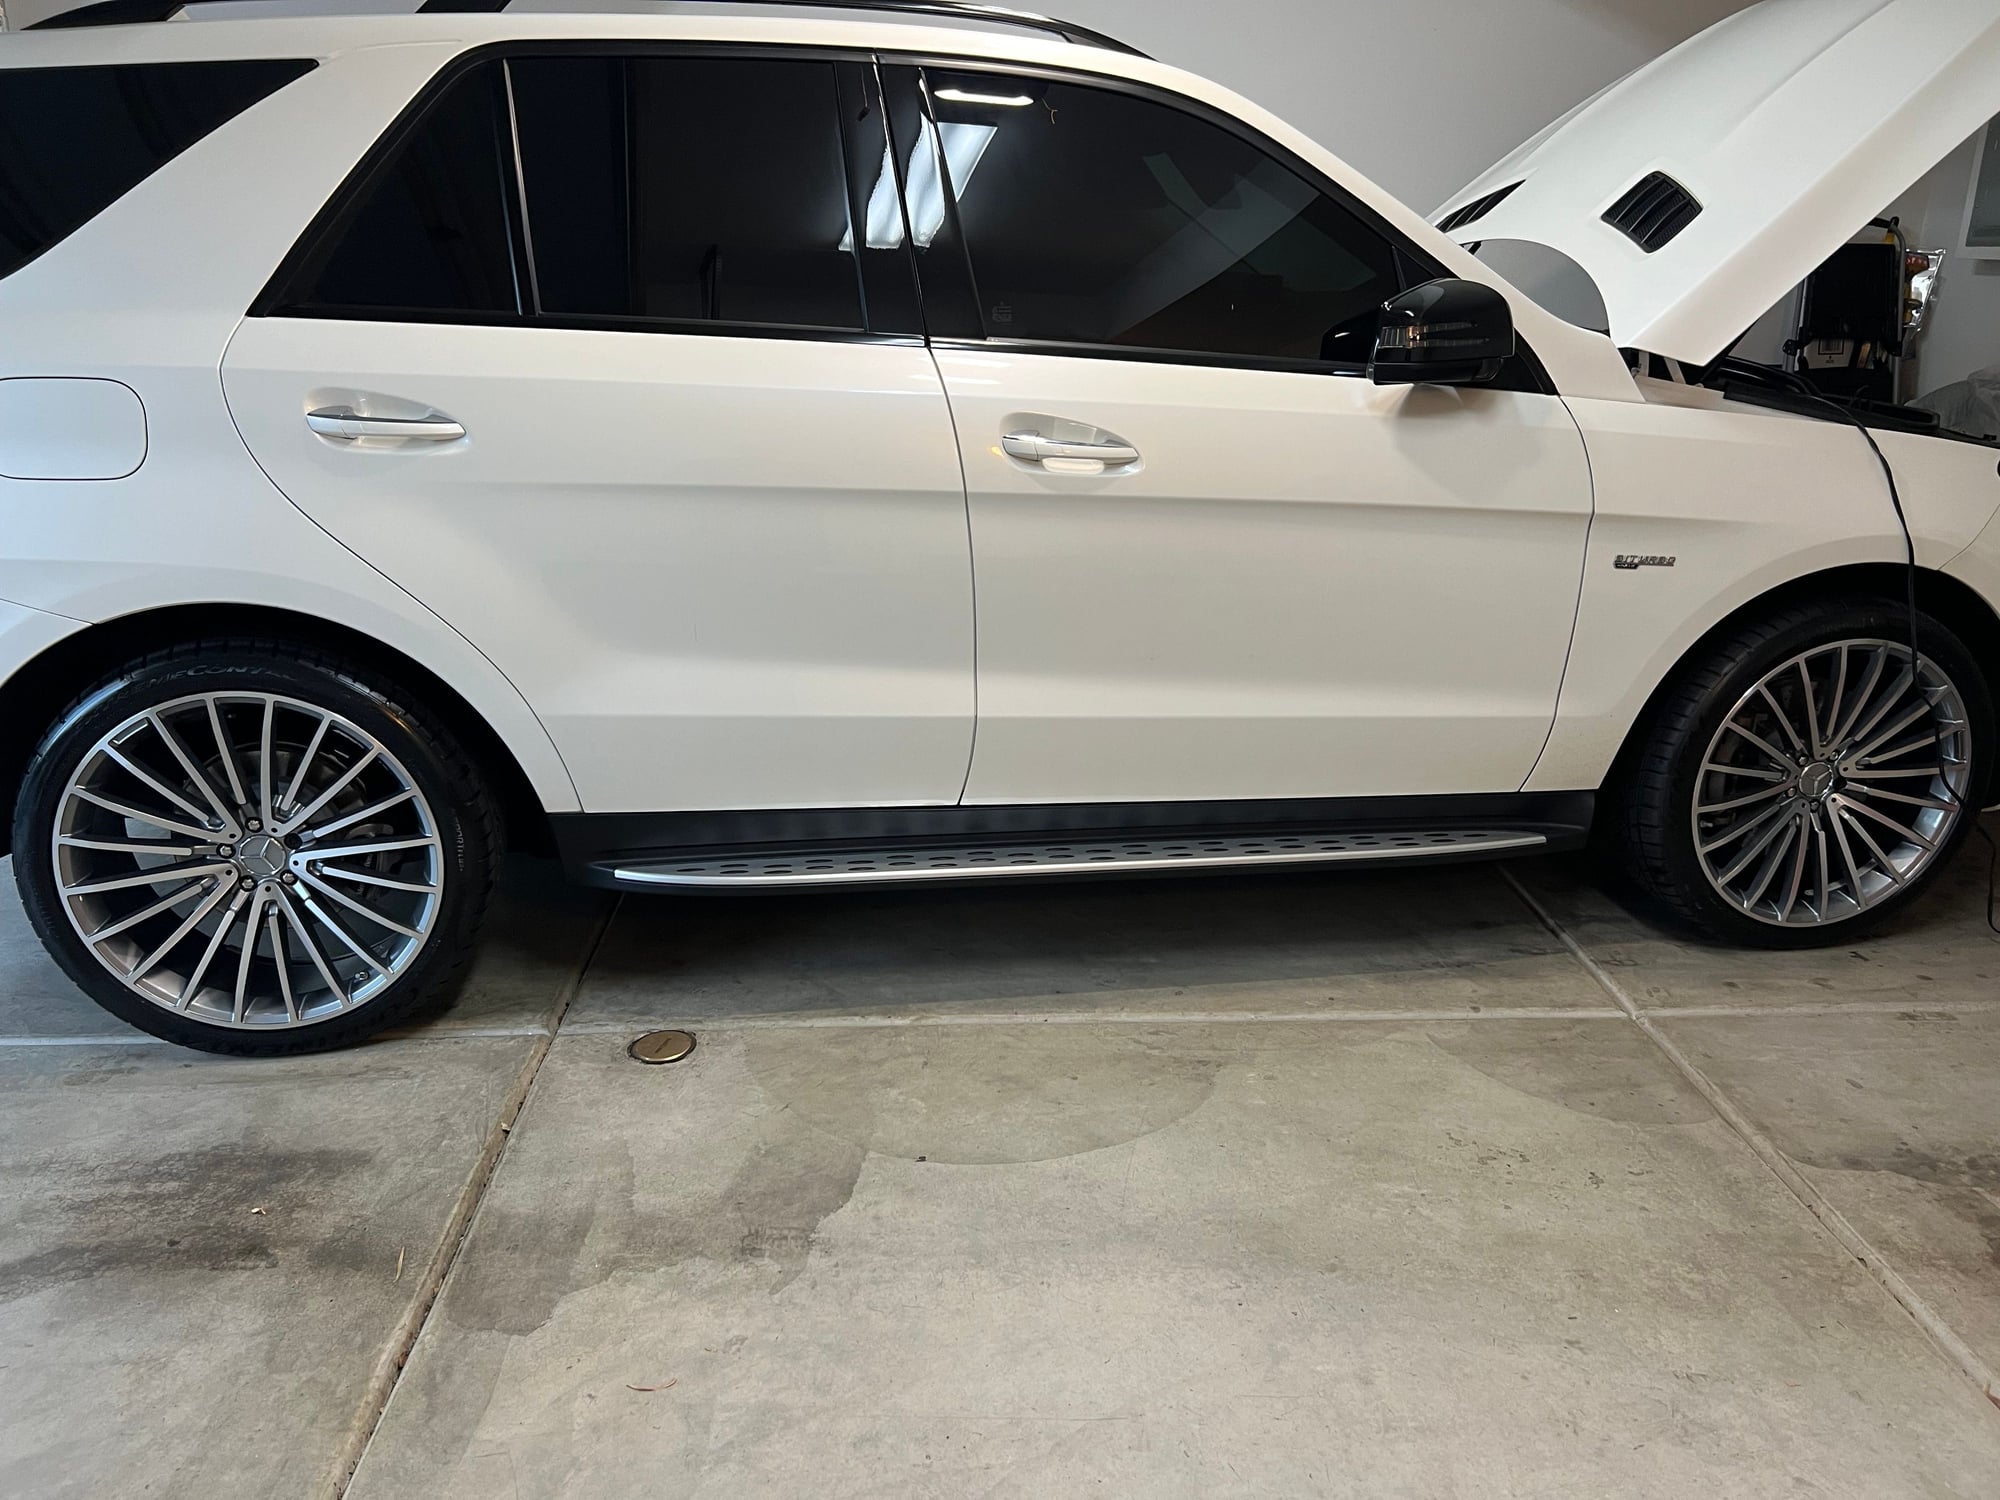 Wheels and Tires/Axles - 2018 mercedes gle 22 inch rims and wheels - New - San Dimas, CA 91773, United States